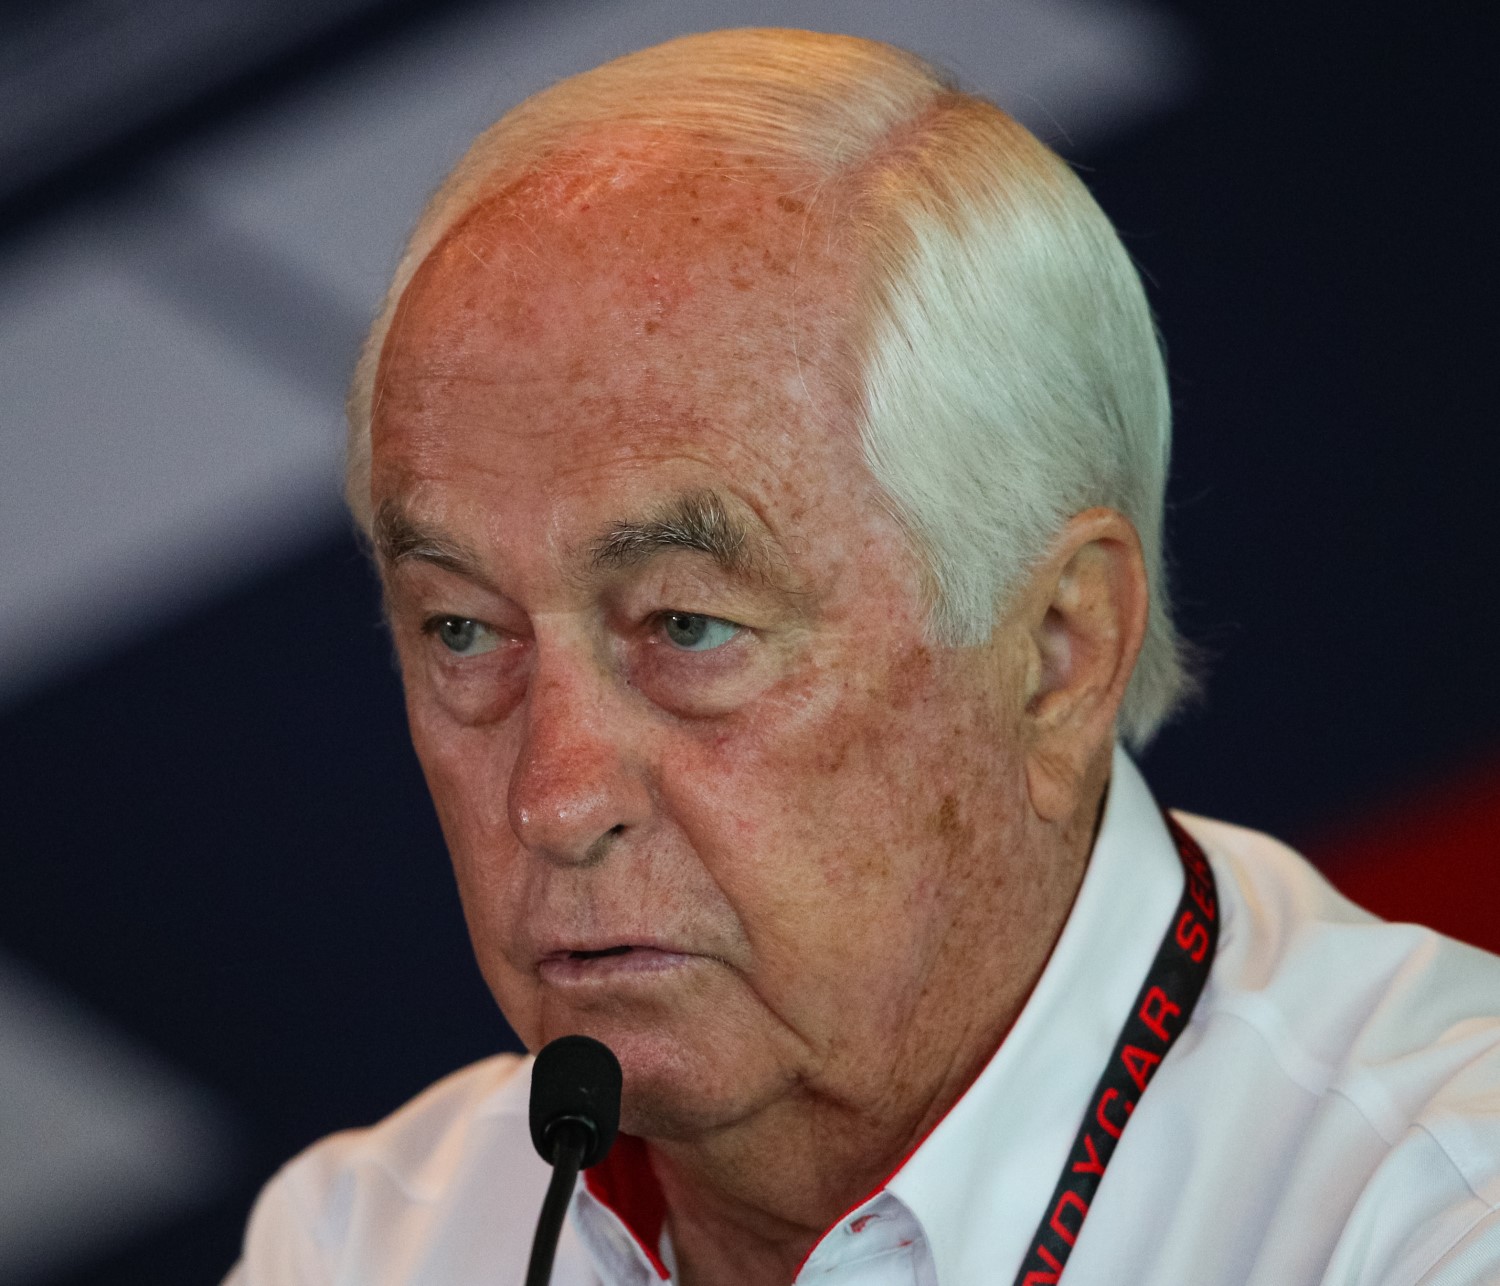 Roger Penske has so much money that losing over $1M per year on th Detroit races is a drop in the bucket to him.